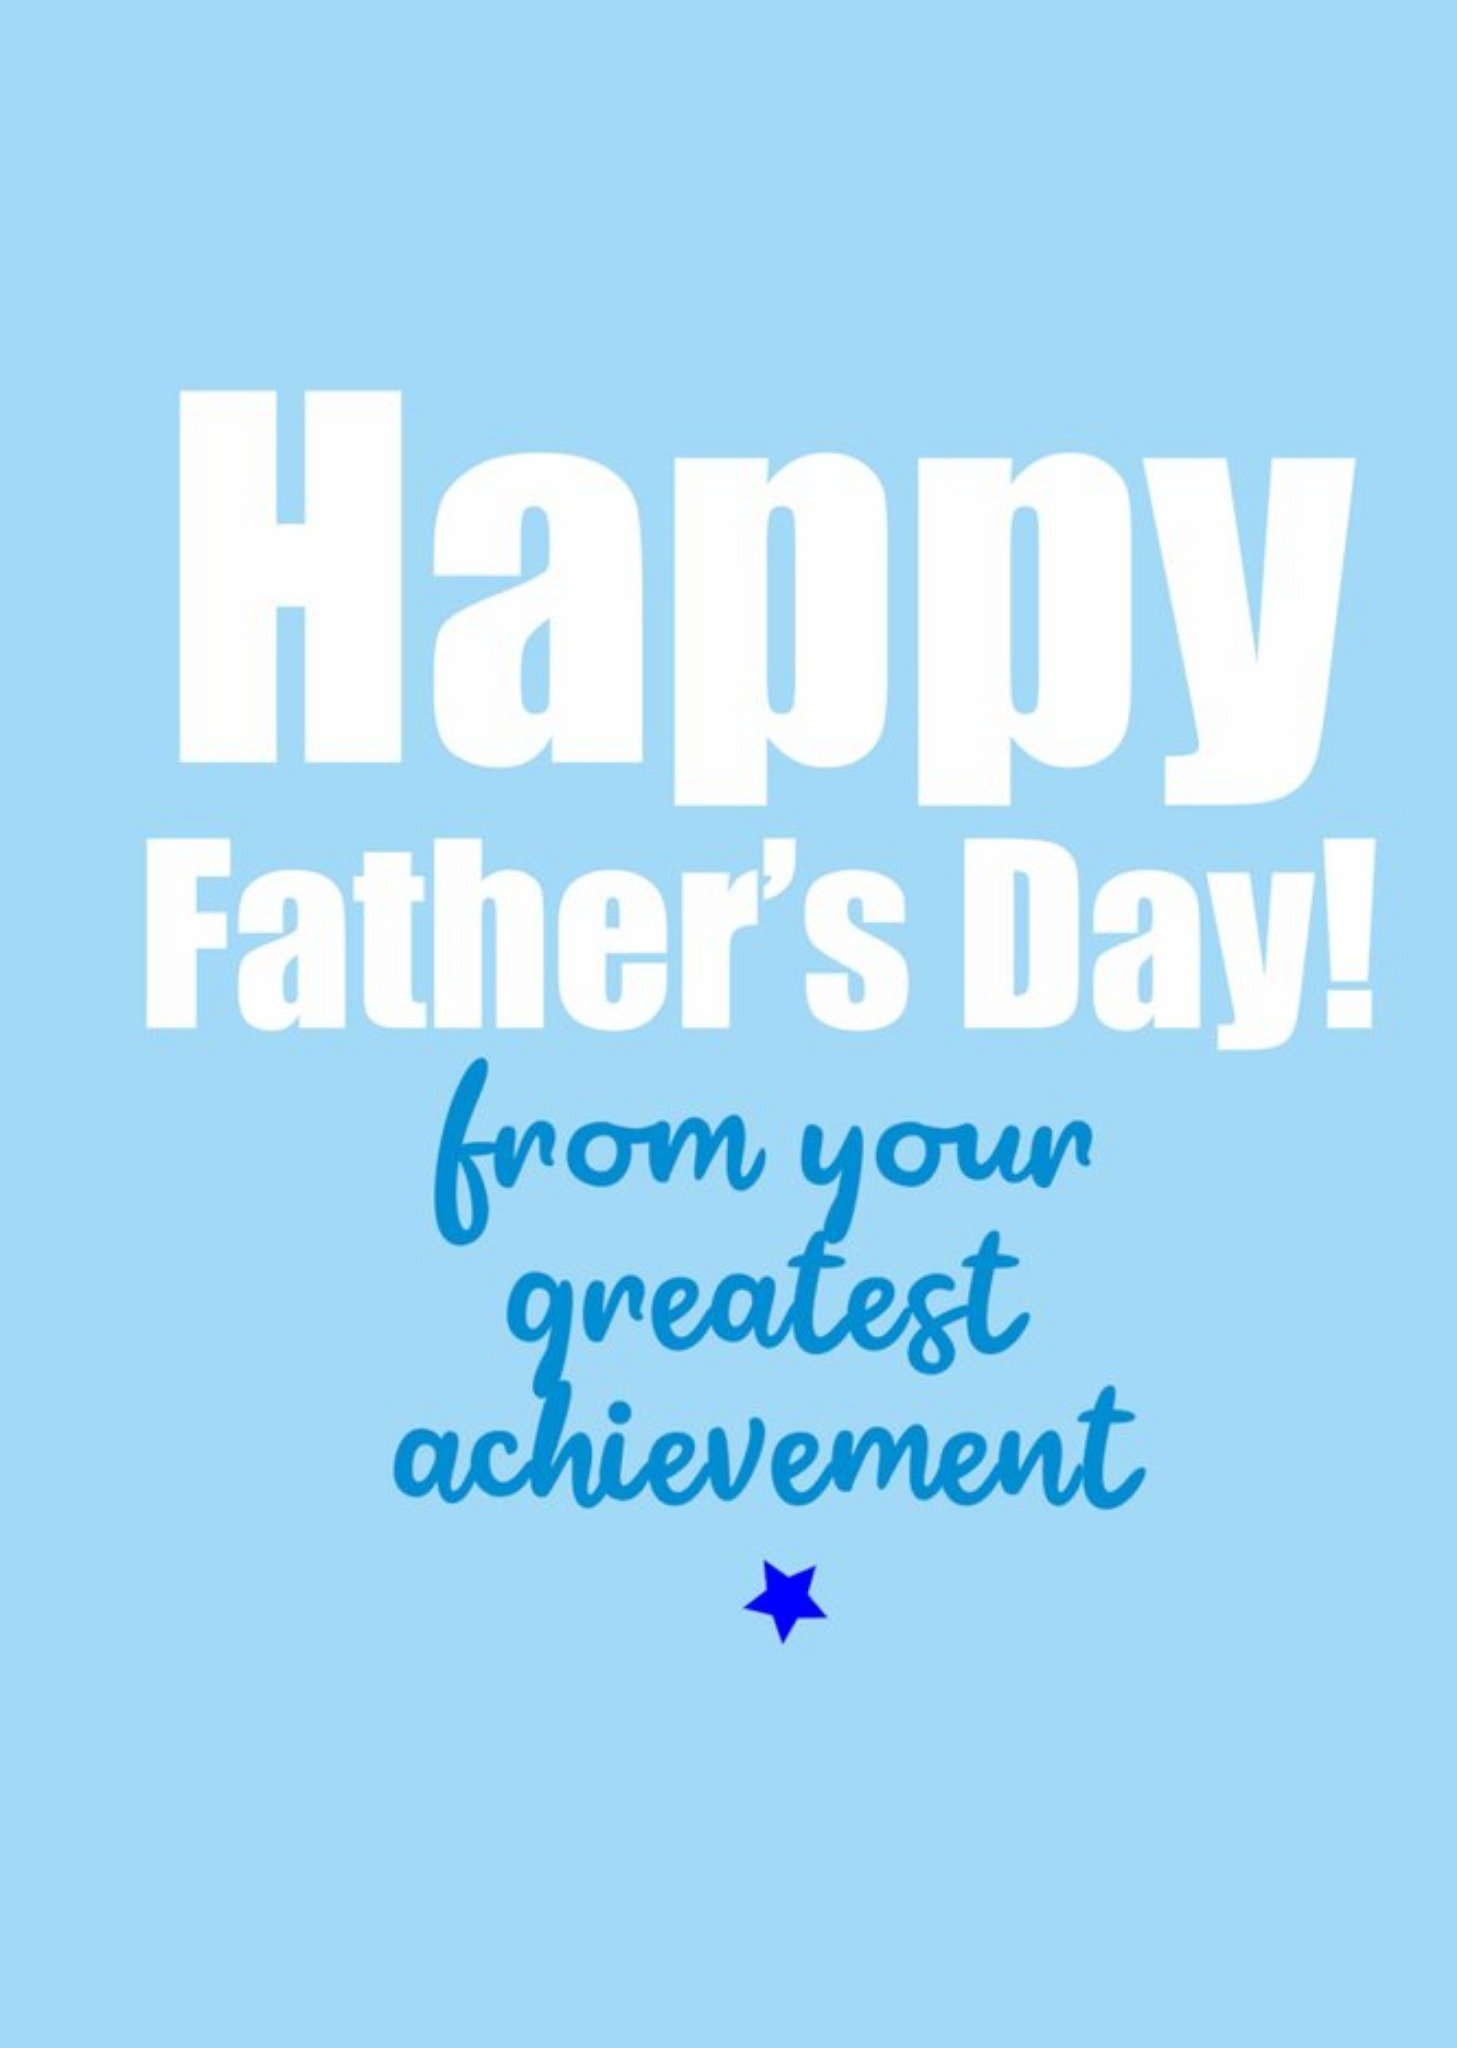 Banter King Happy Fathers Day From Your Greatest Achievement Card Ecard